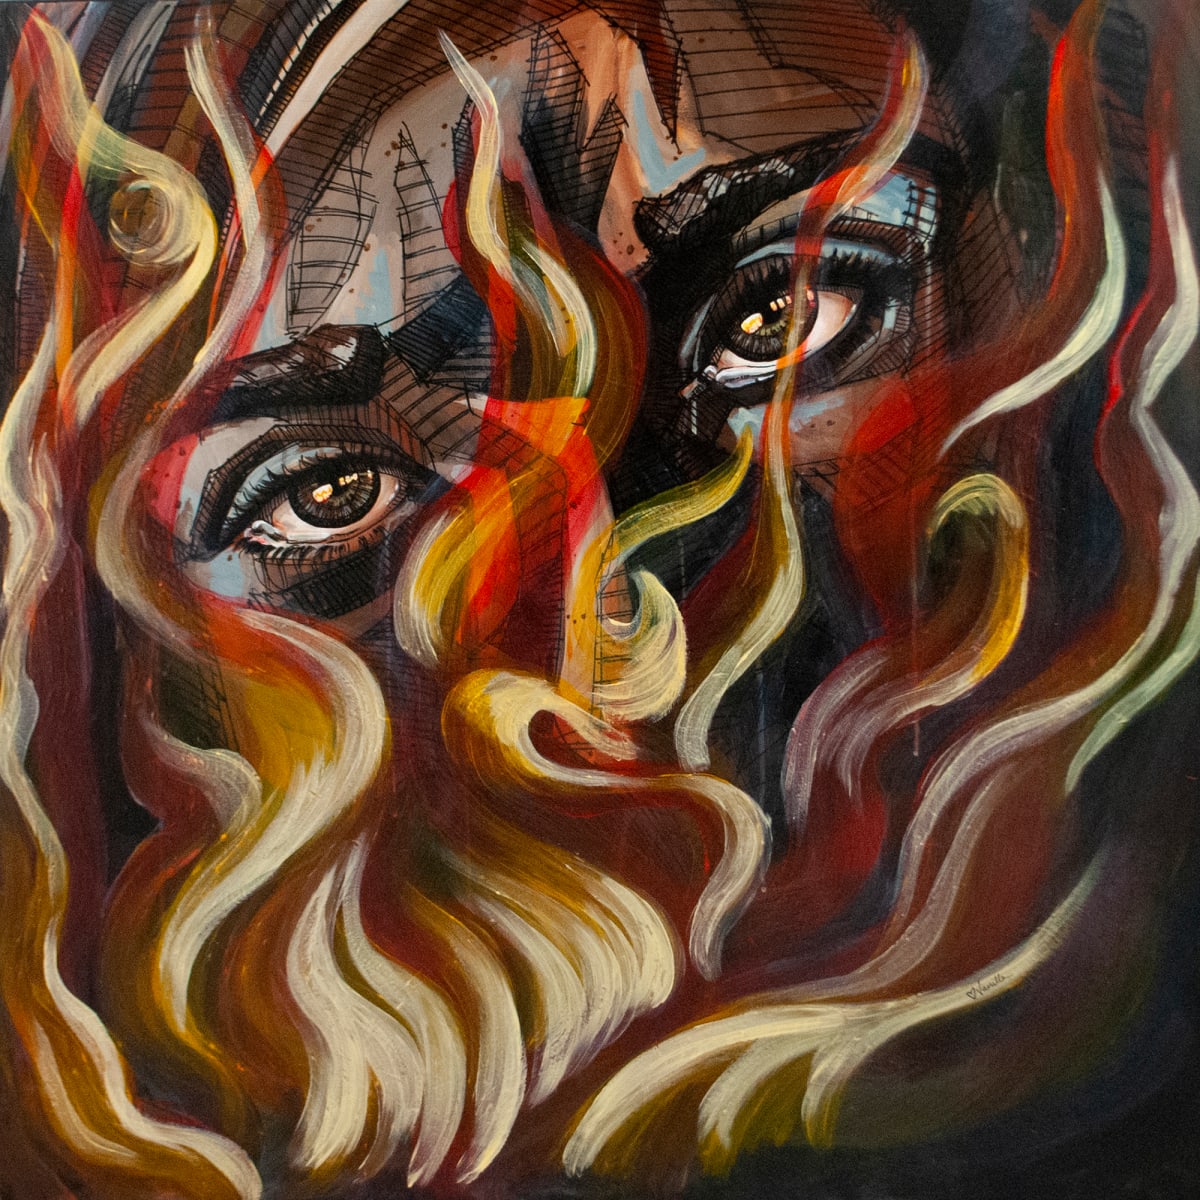 Rage 2022  Image: Picture of an accusing person's eyes staring at the viewer, with flames between the viewer and the subject. She's staring at us through fire.